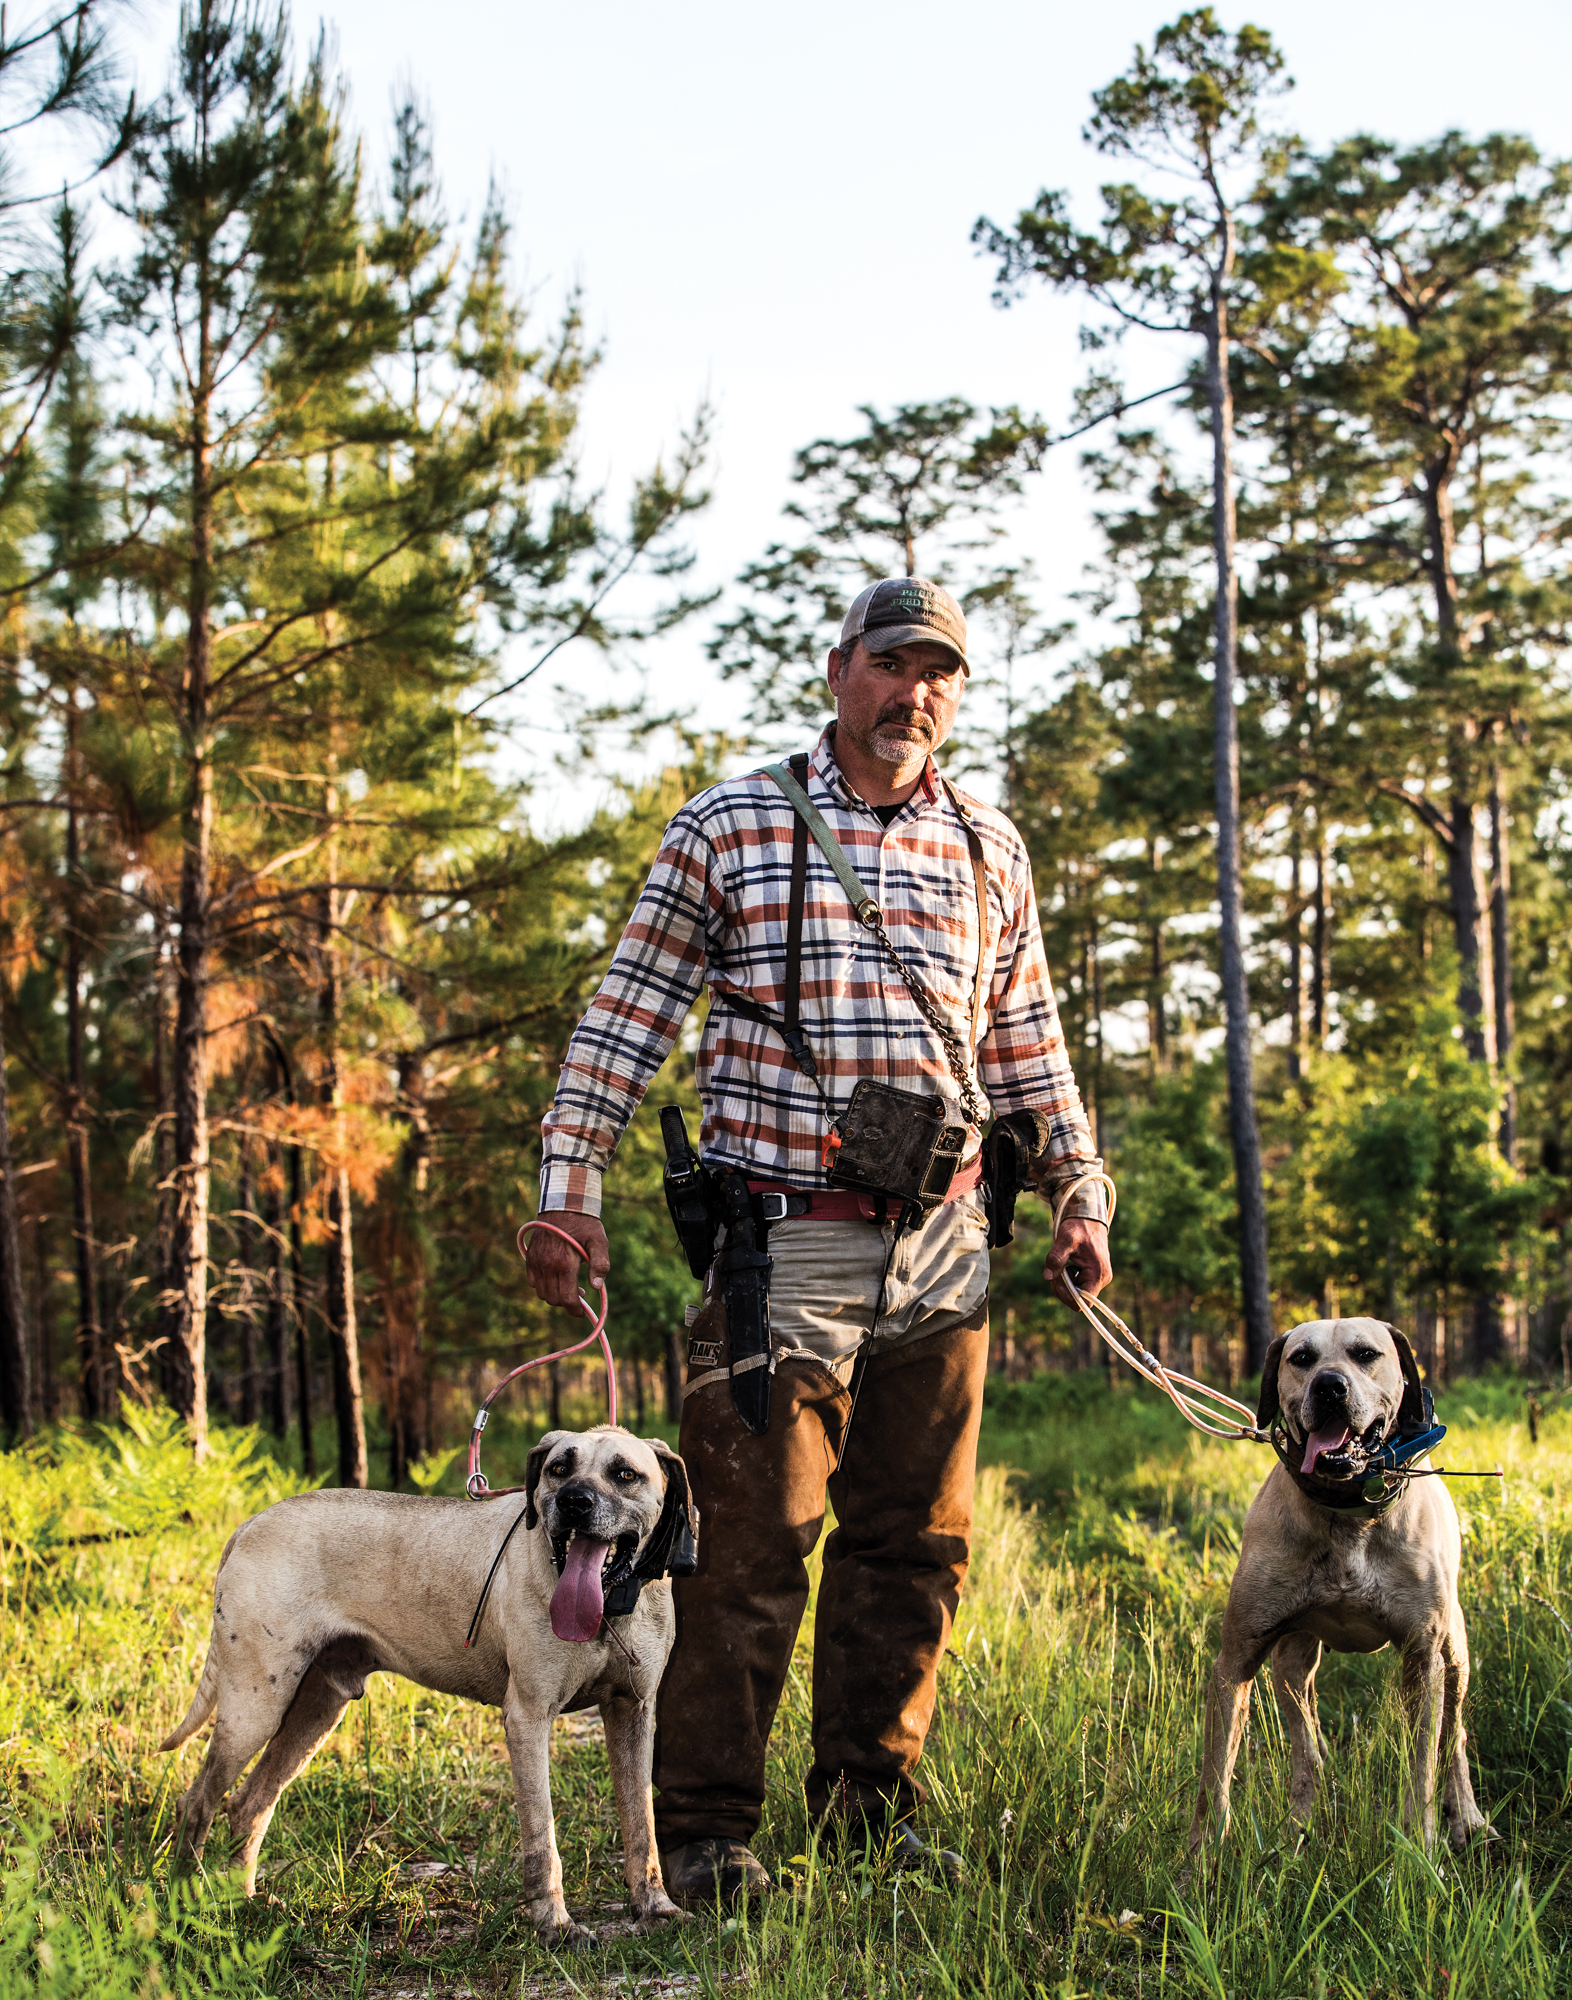 A portrait of a hunter with his dogs on leashes.